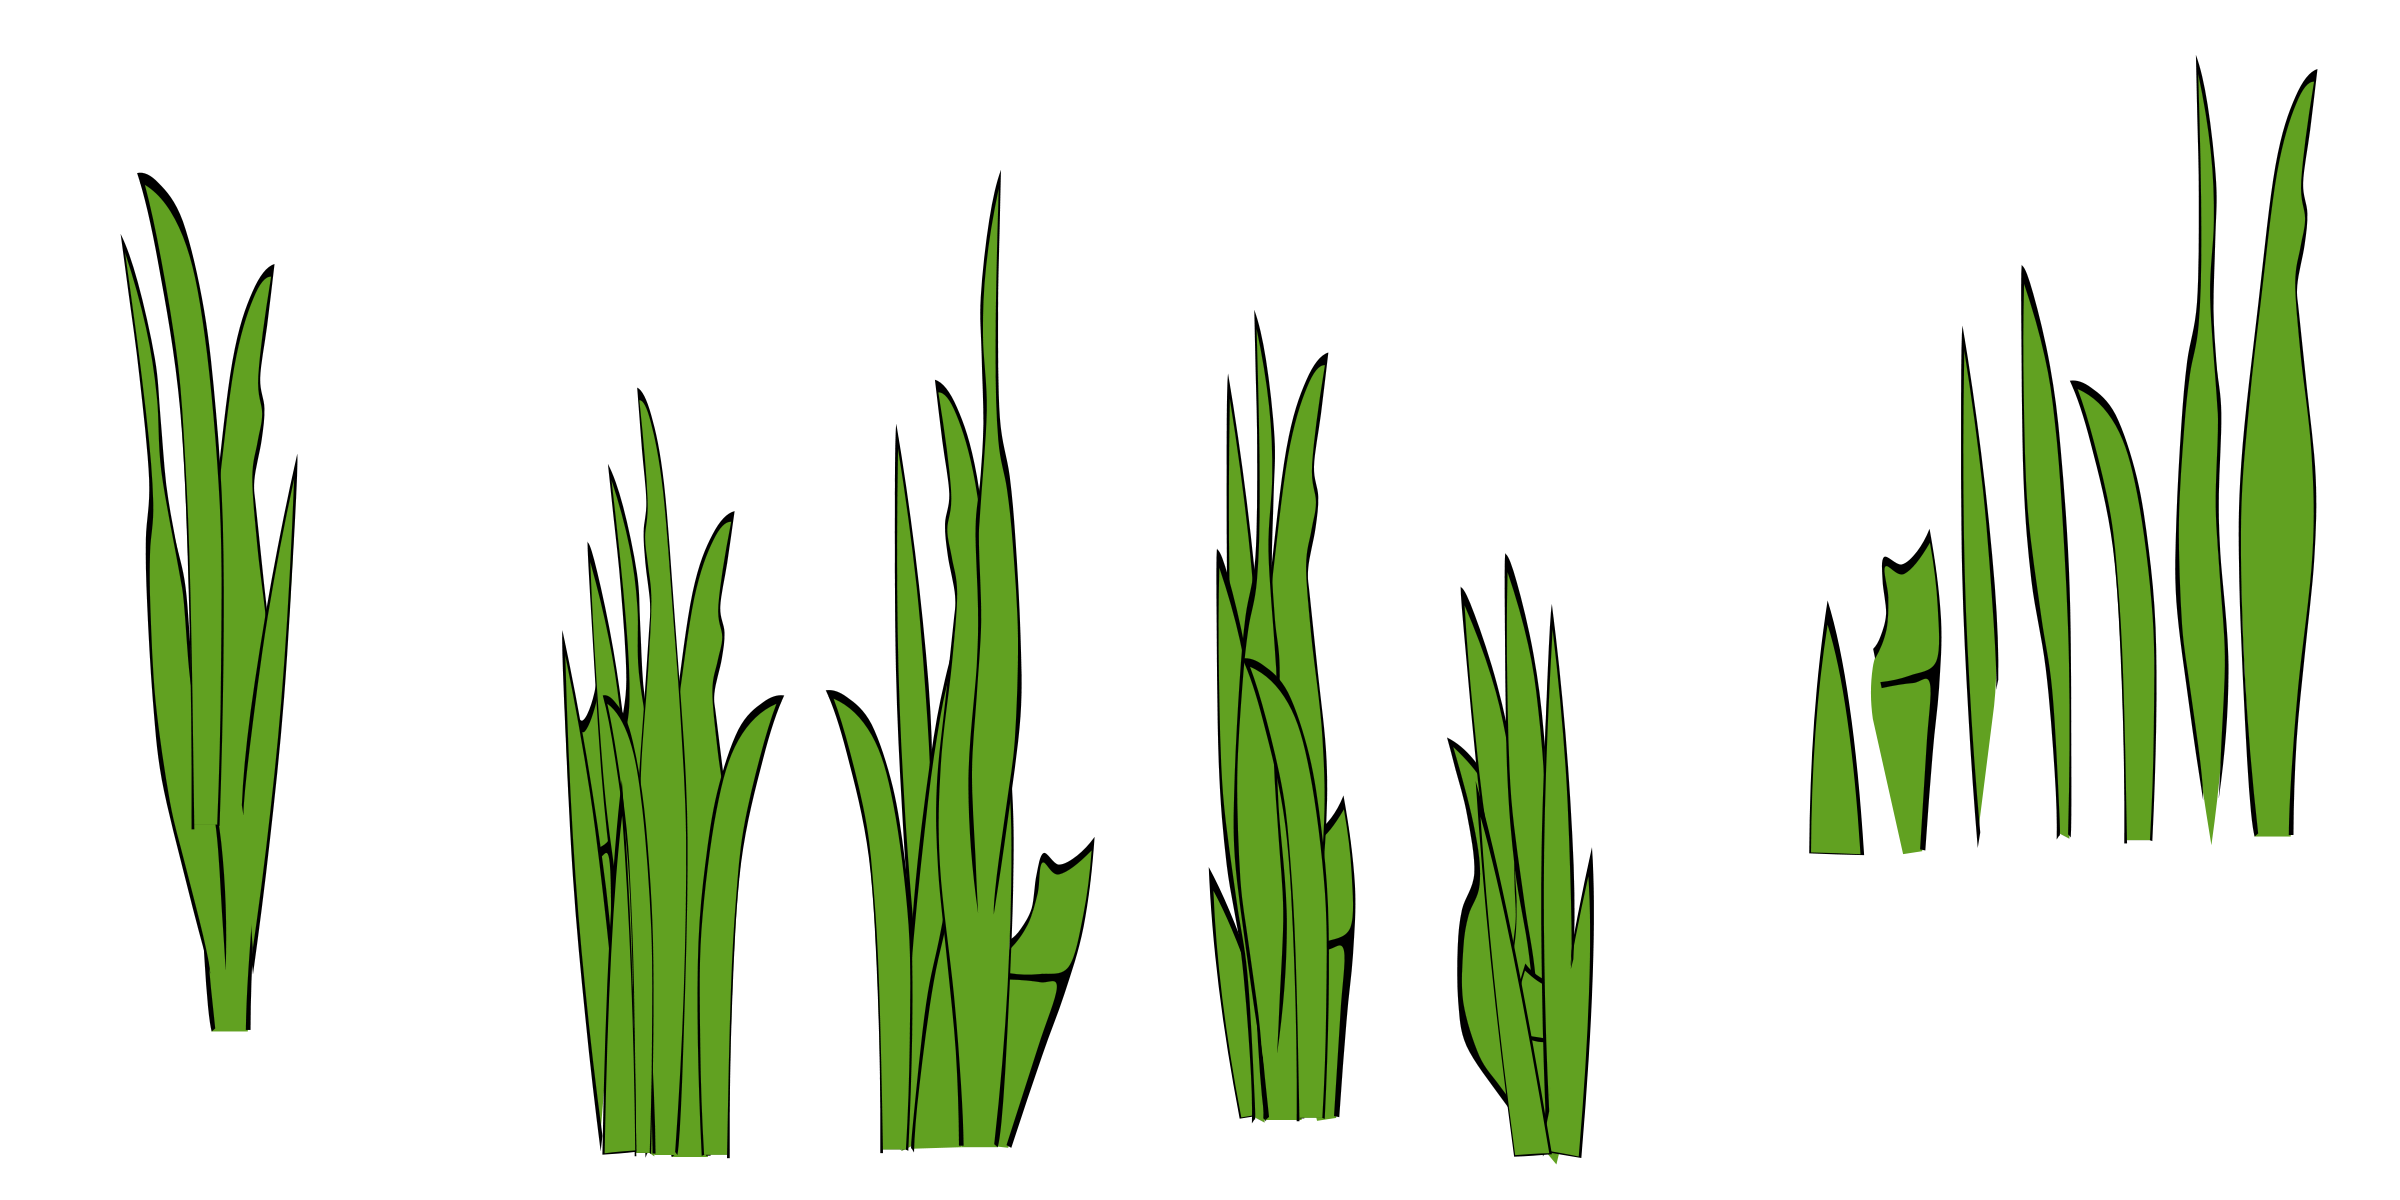 Grass Blades and Clumps | Clipart Panda - Free Clipart Images